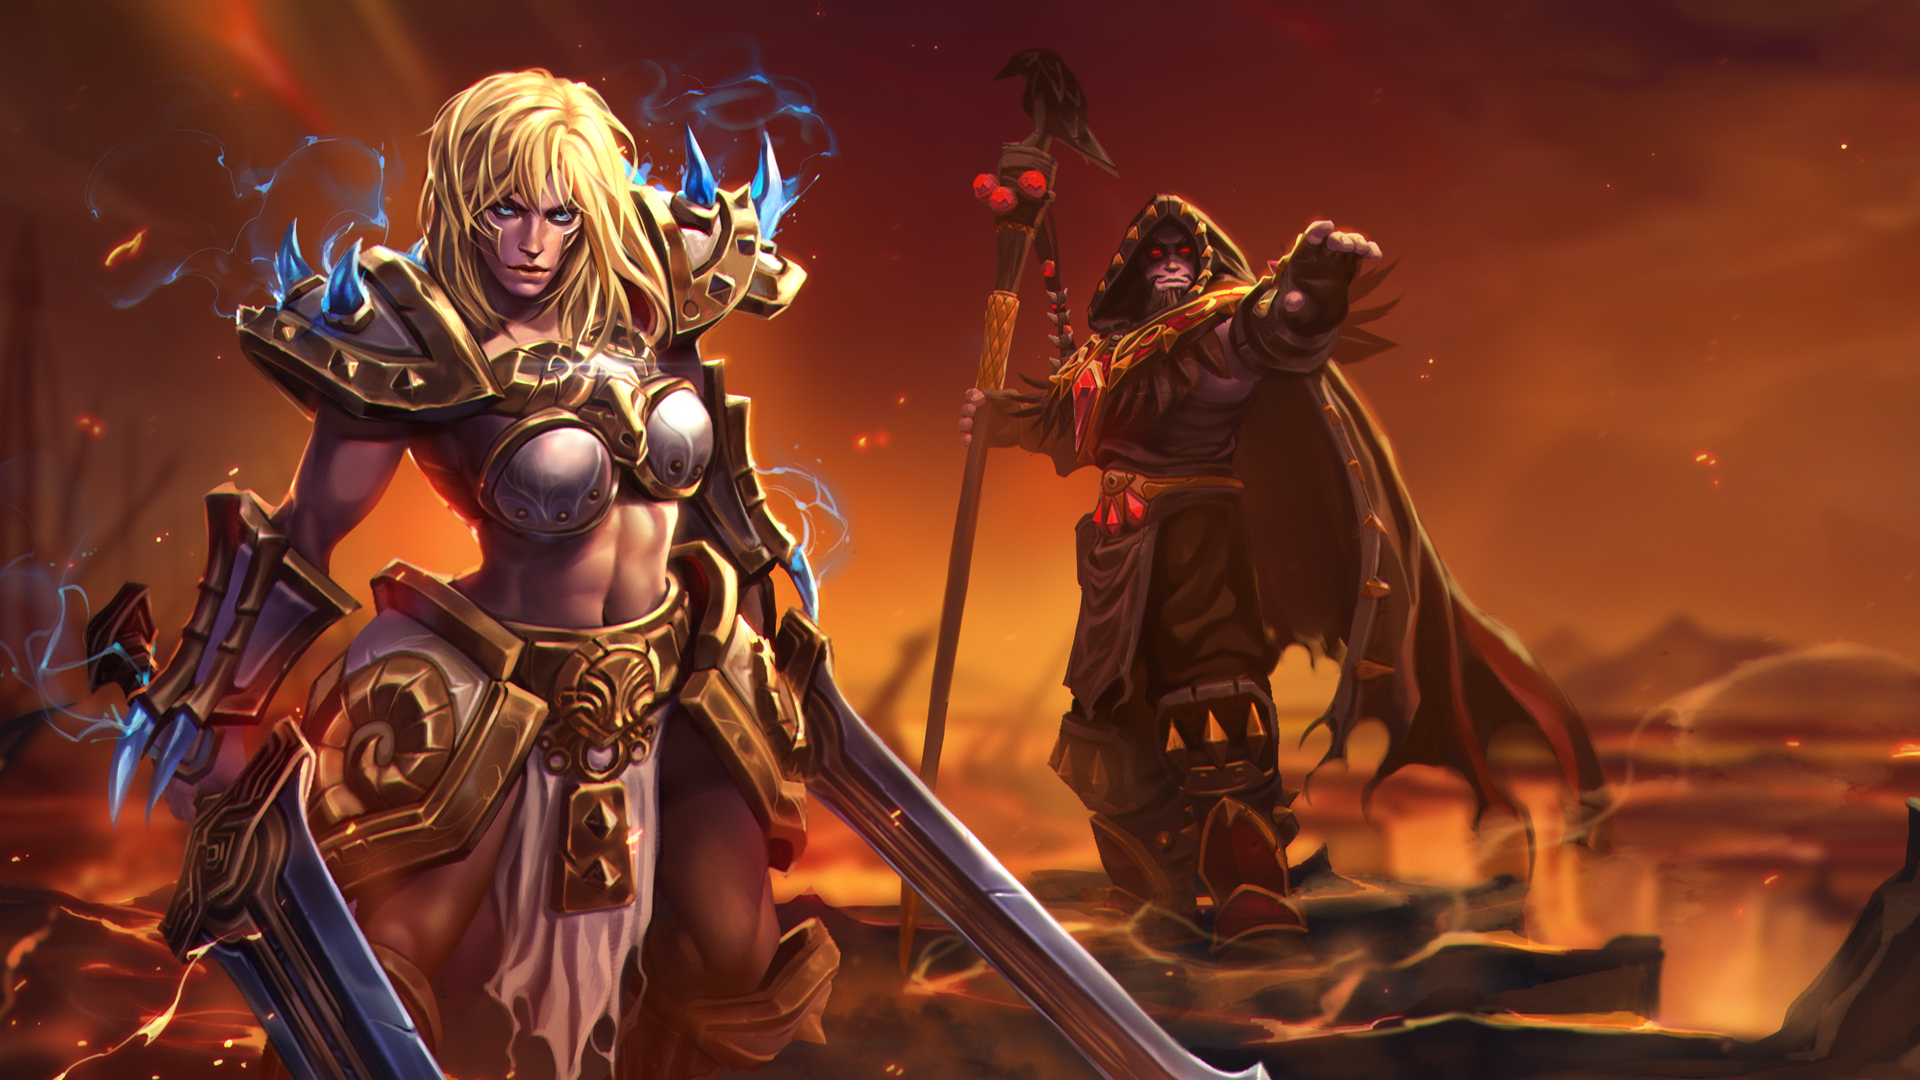 Blizzard Entertainment Video Games Heroes Of The Storm Warcraft Medivh Sword Blonde Long Hair Sonya  1920x1080